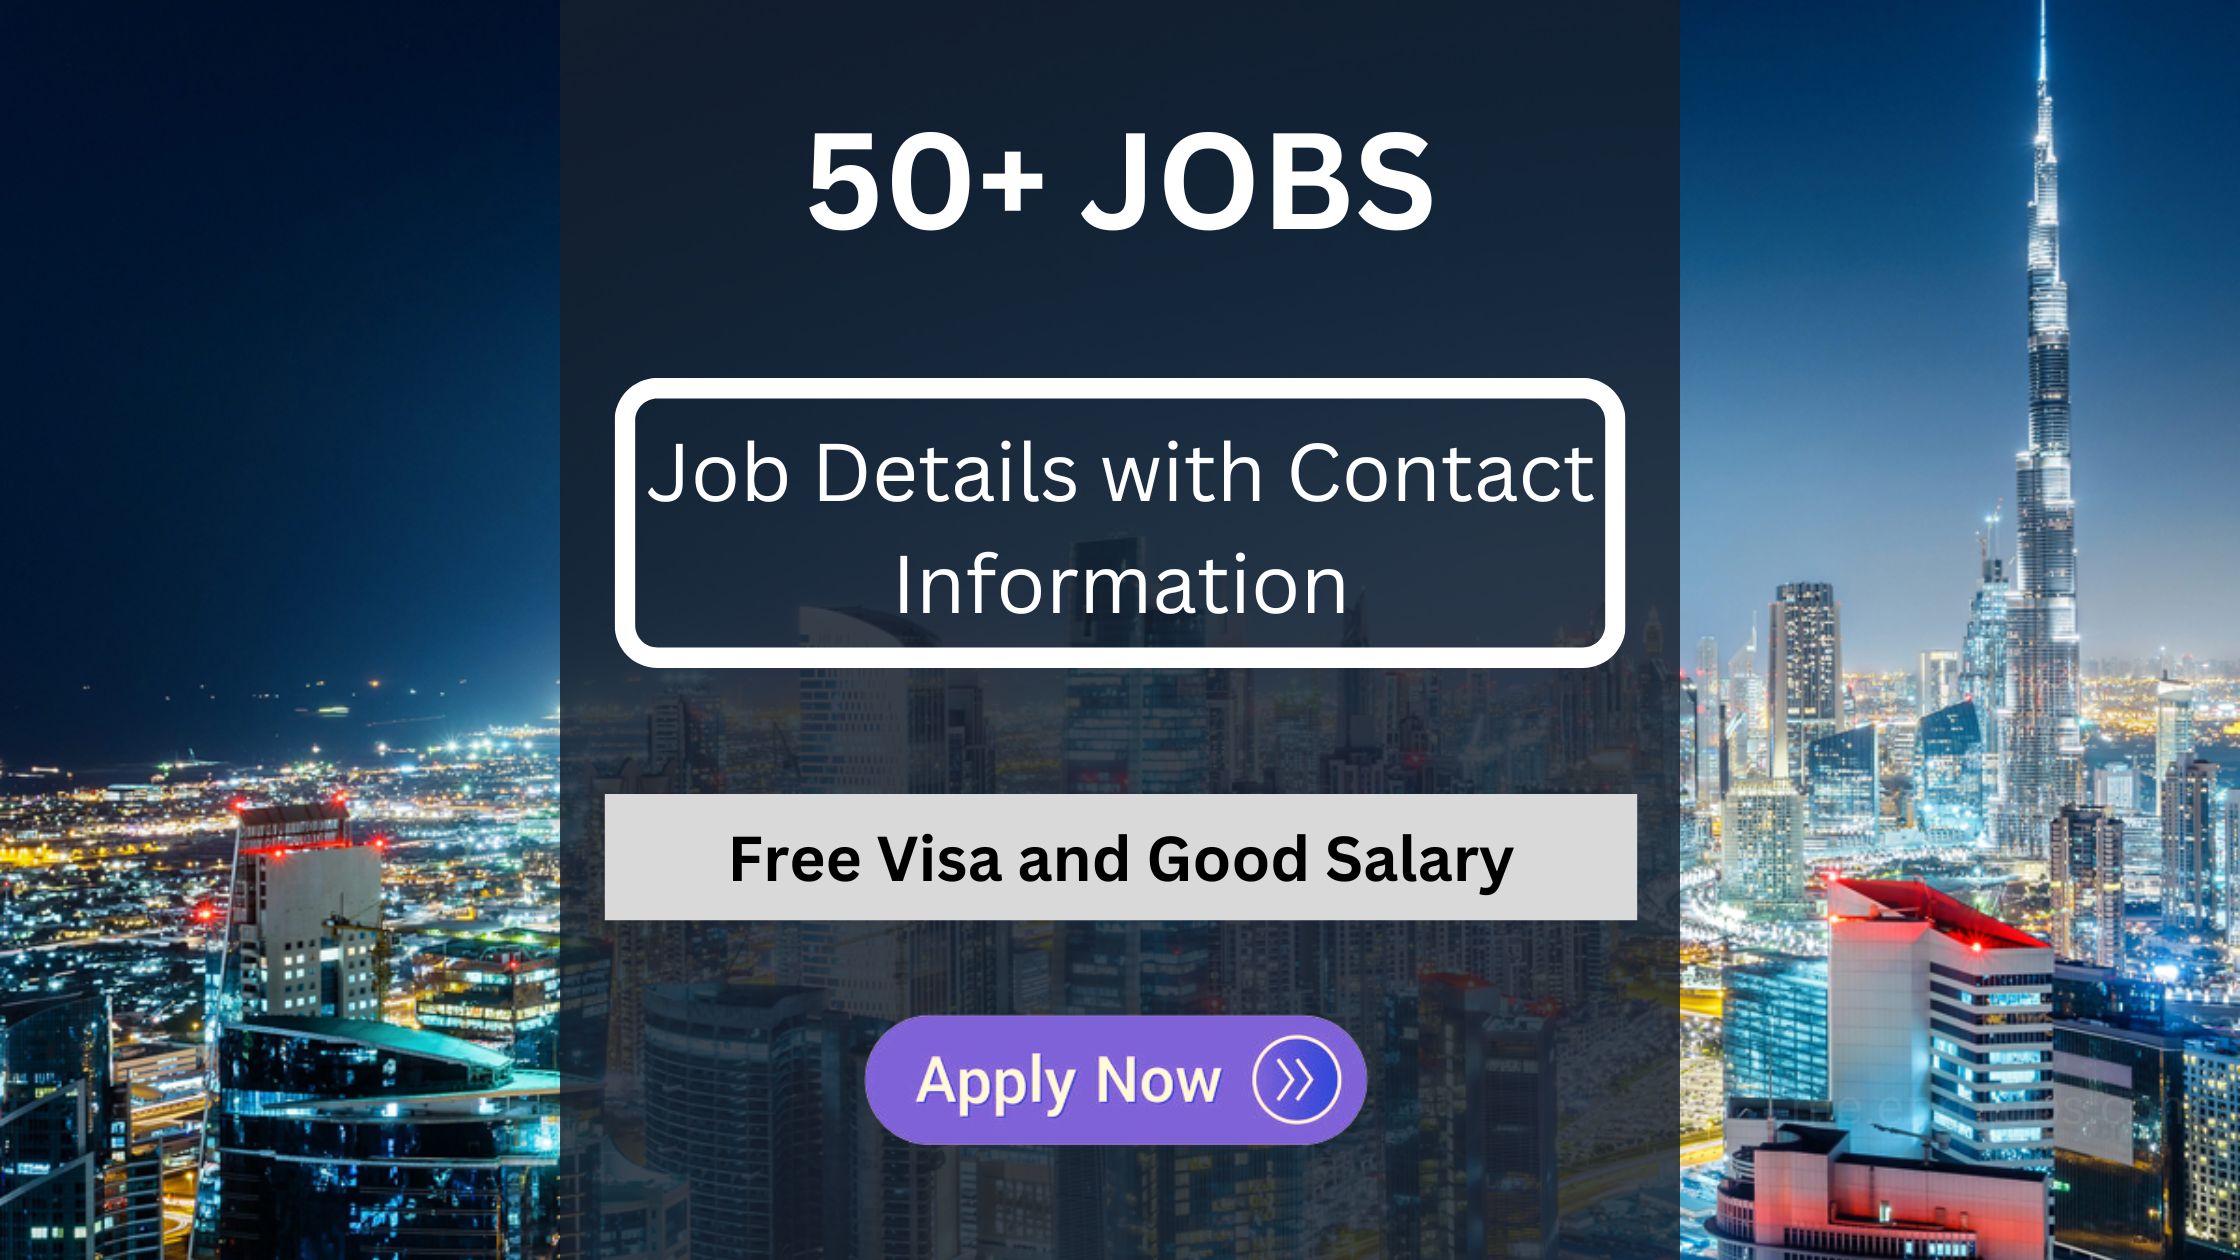 50+ Urgent Hirings in UAE - Job Details with Contact Information